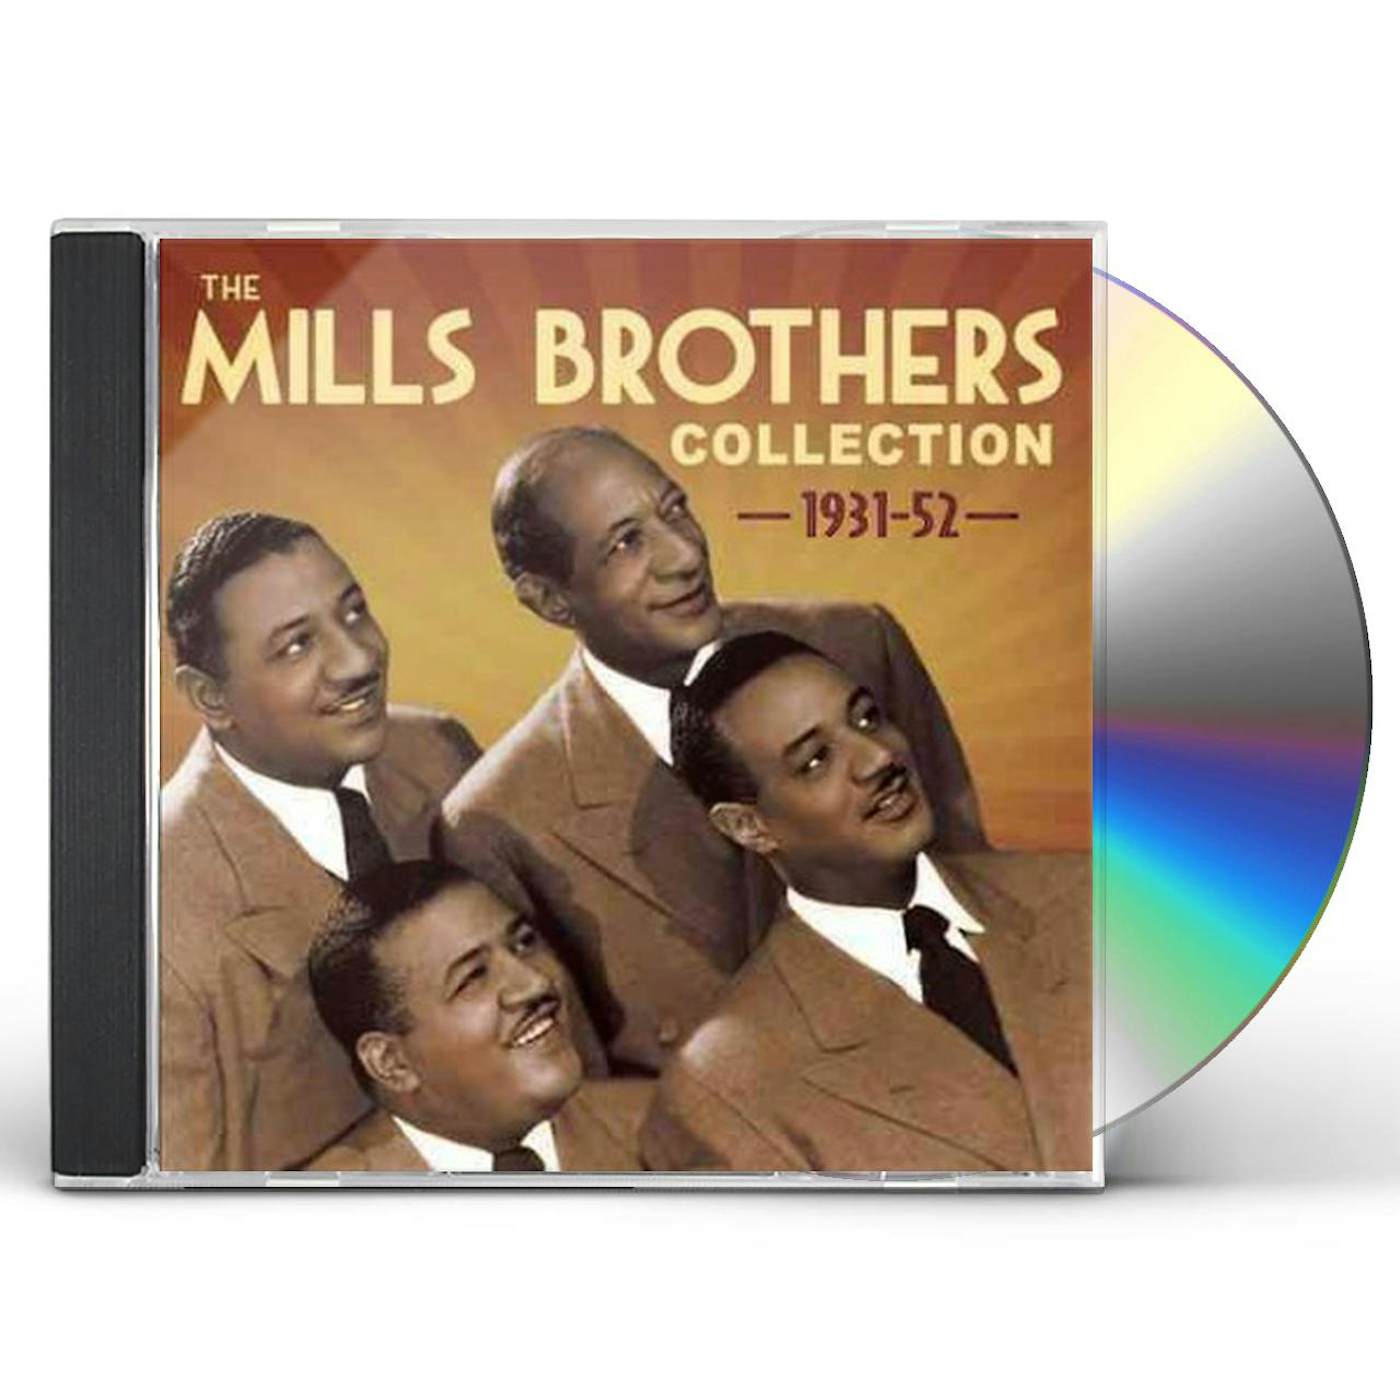 The Mills Brothers COLLECTION 1931-52 CD